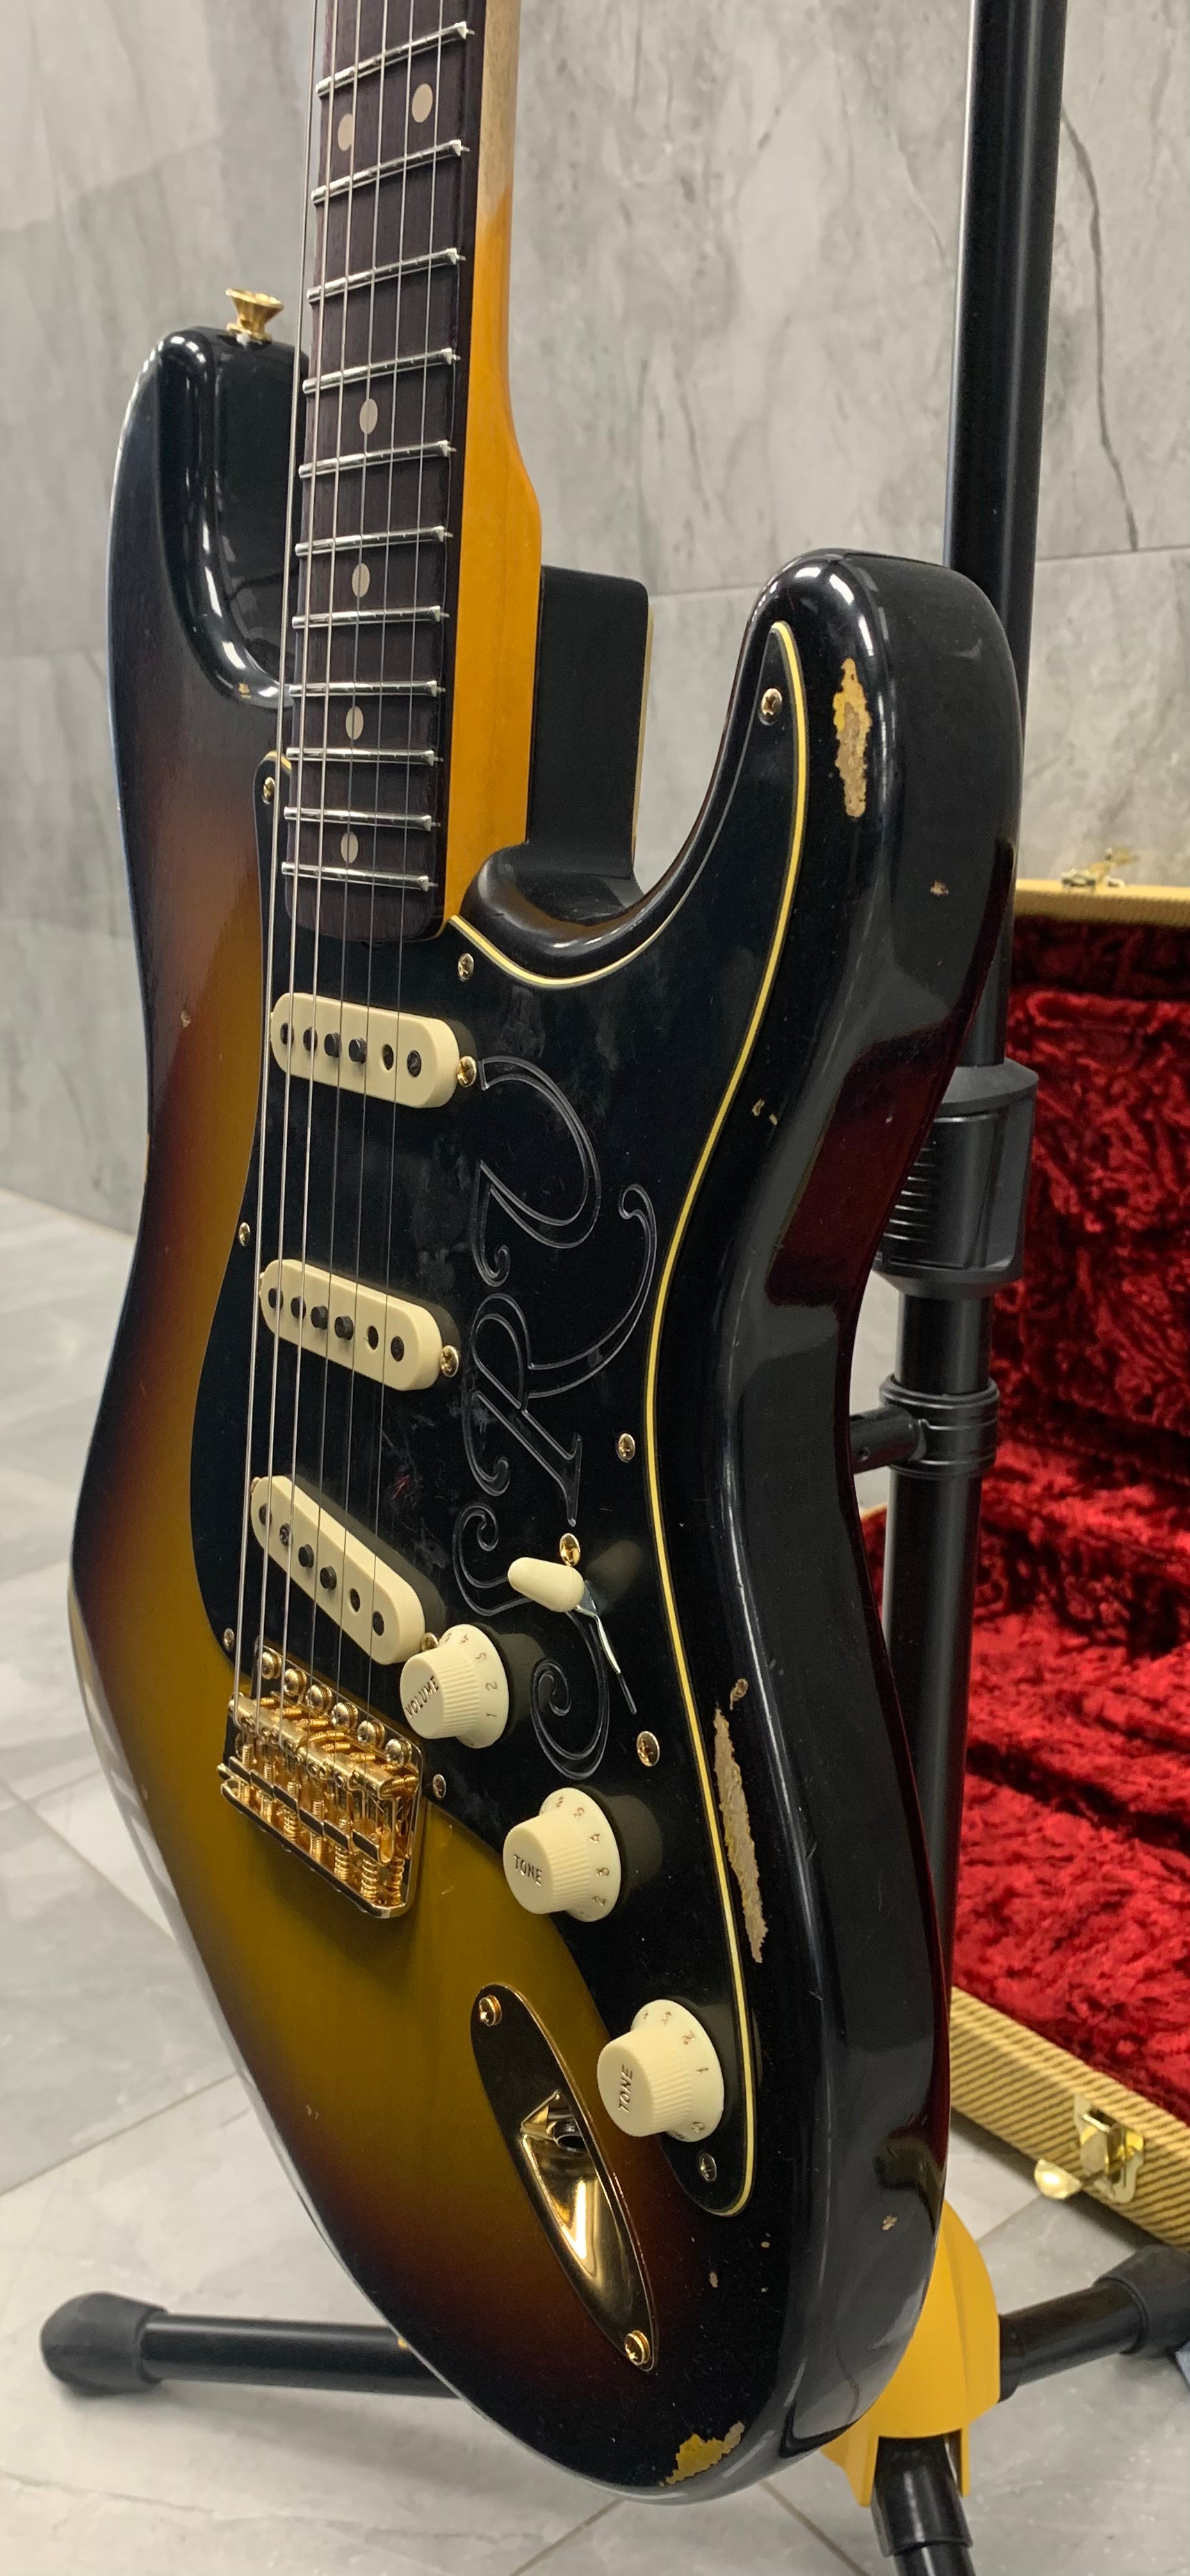 Fender Custom Shop SRV Stevie Ray Vaughan Signature Stratocaster Relic with Closet Classic Hardware, Rosewood Fingerboard, Faded 3-Color Sunburst 9235001087 SERIAL NUMBER CZ566267 - 7.6 LBS